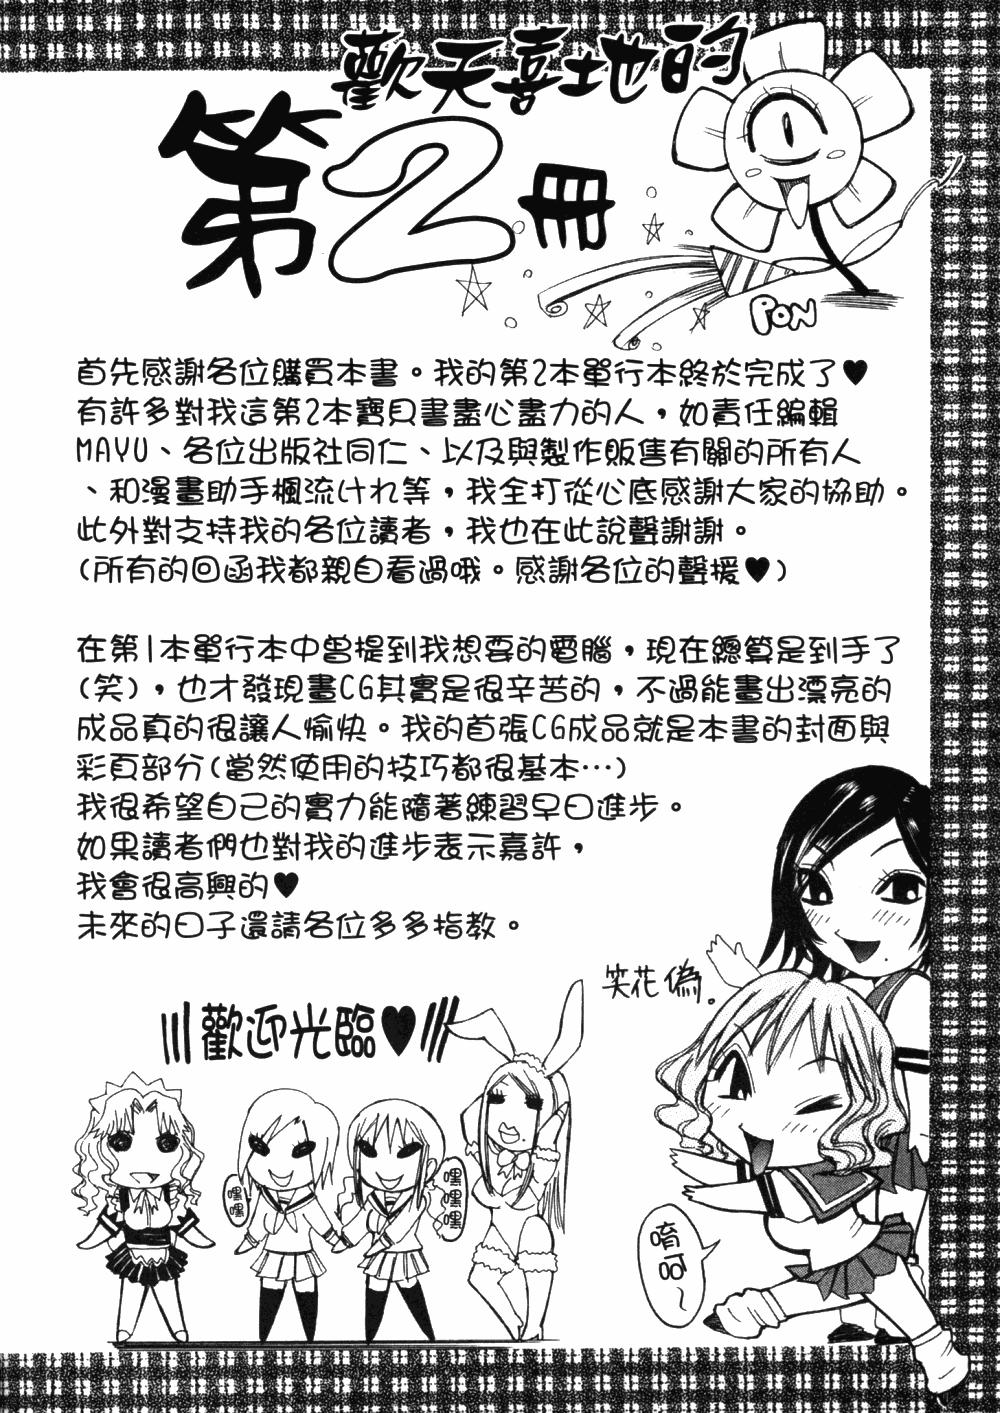 Fun Full Course | 秀色可餐 Blow Jobs - Page 175